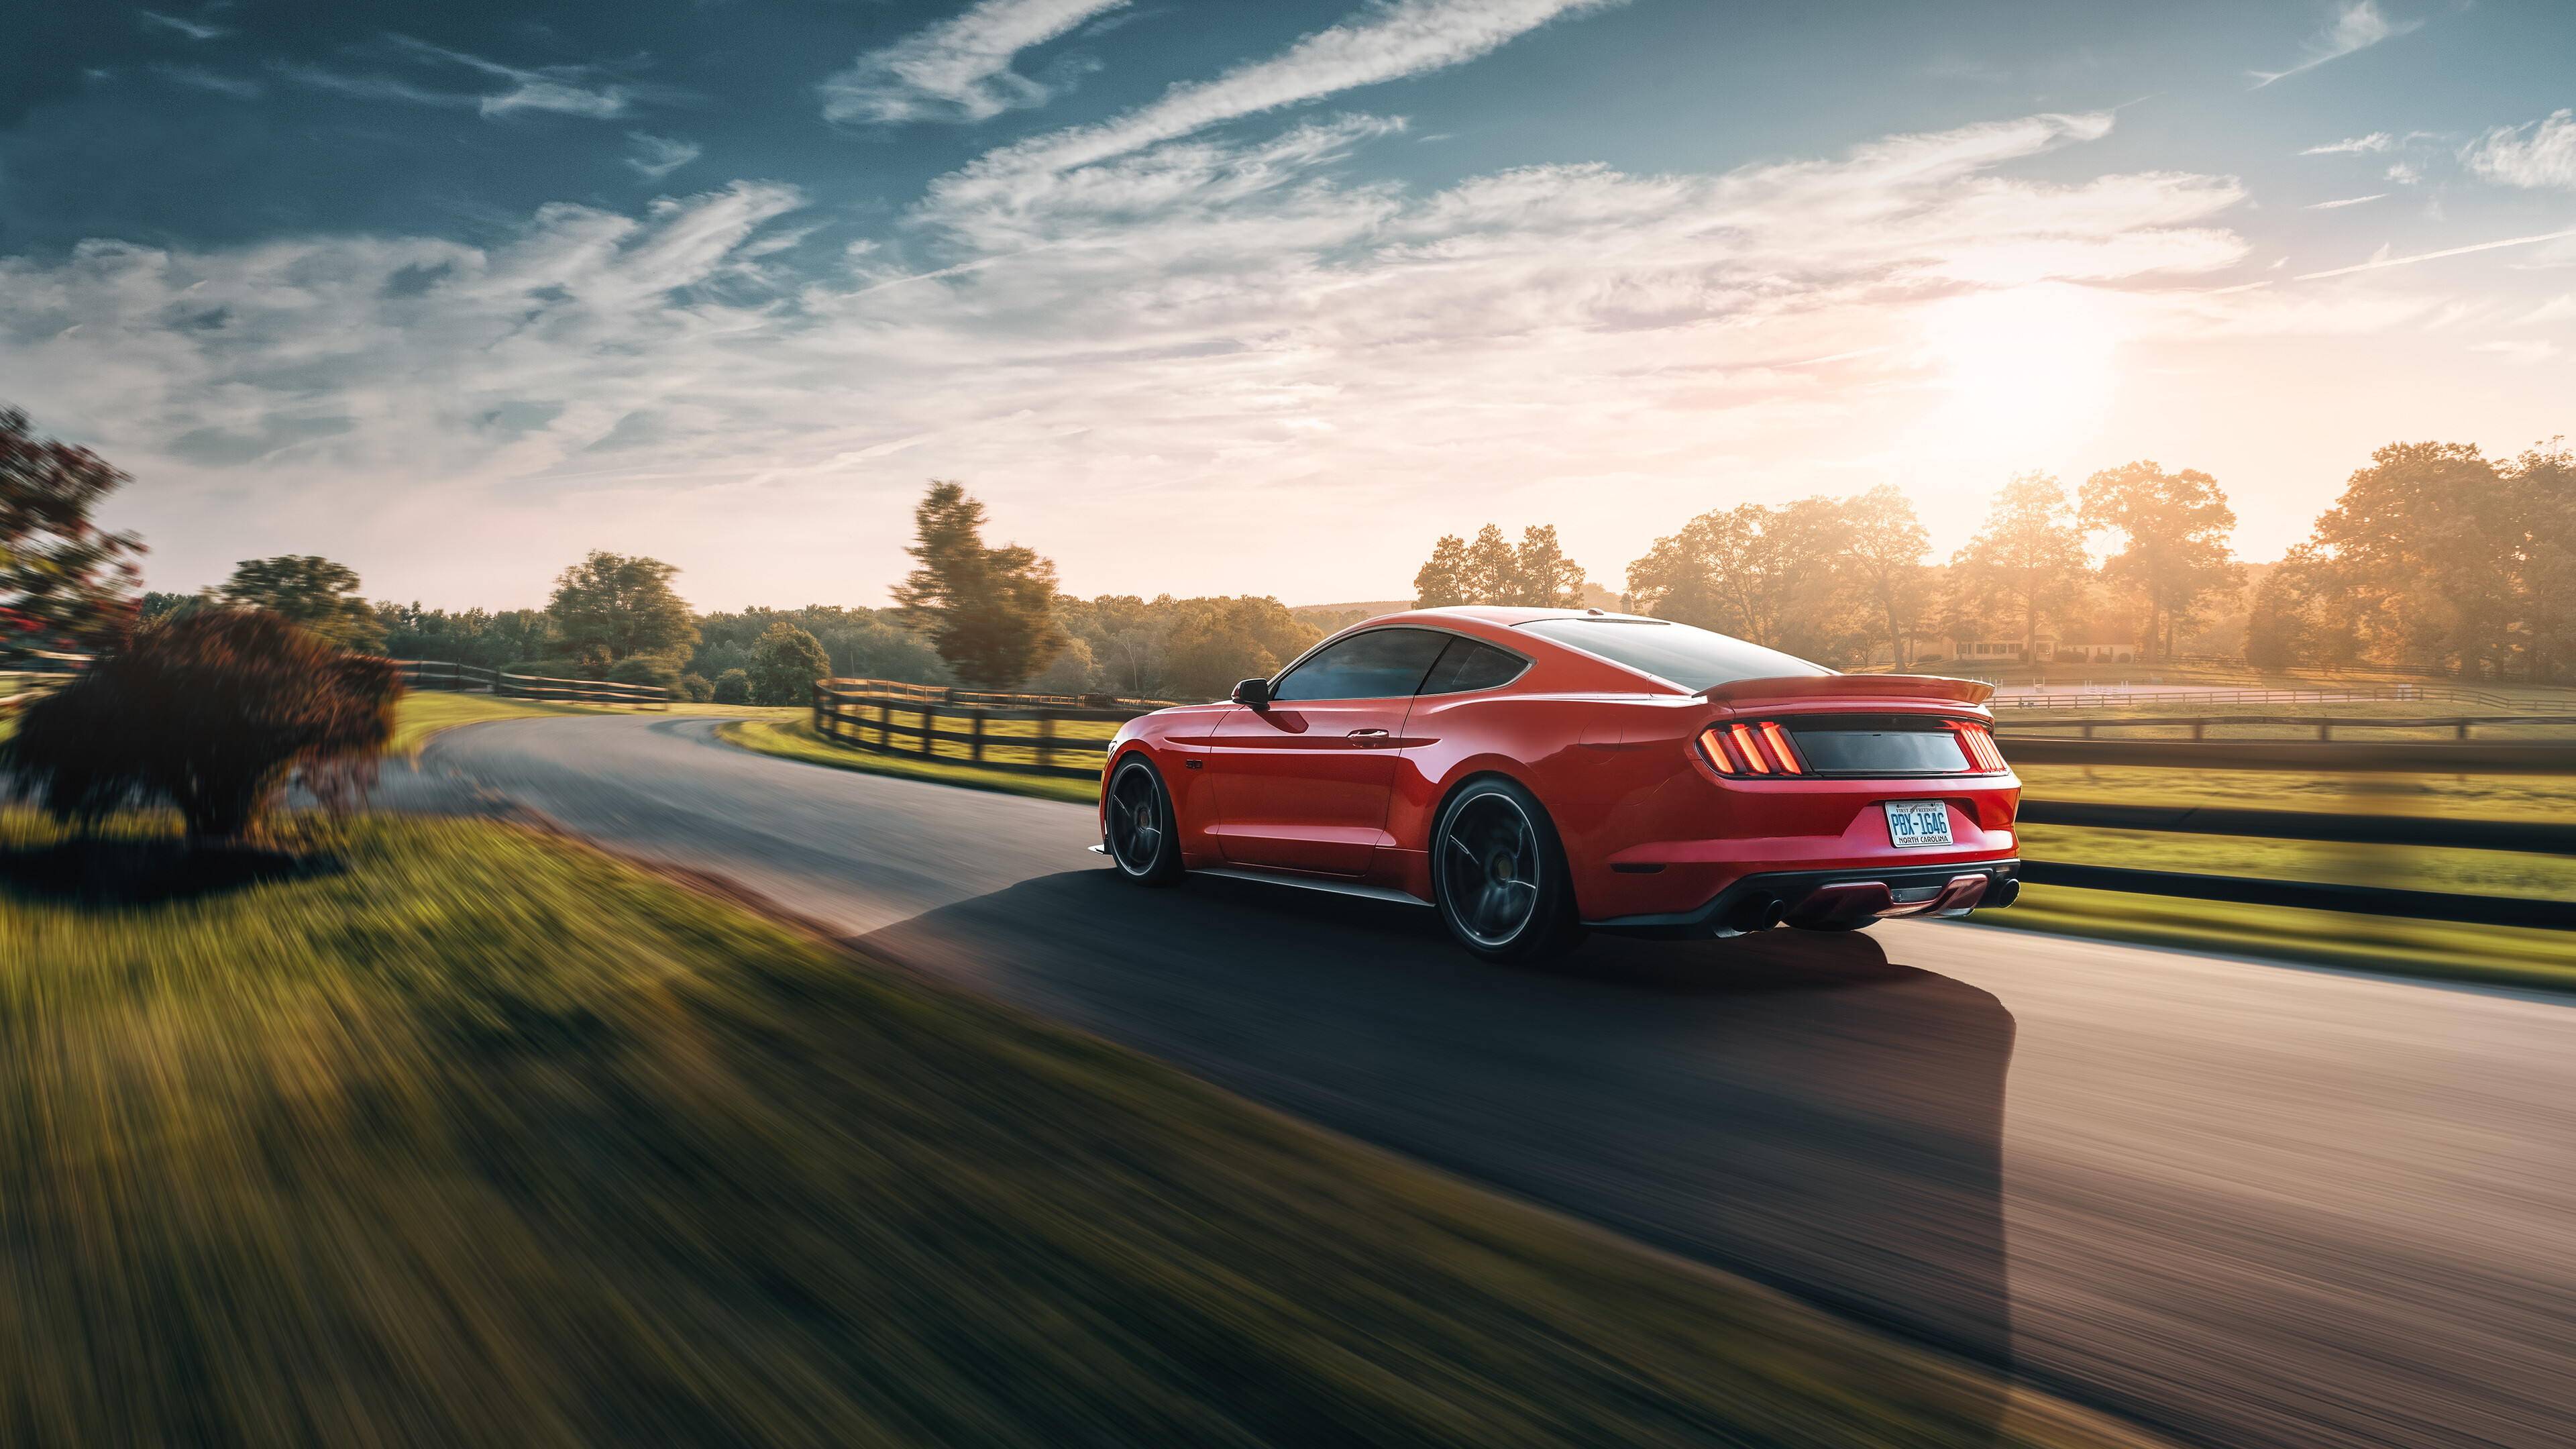 Ford: Mustang GT4, Powered by a naturally-aspirated 5.2-liter V8 racing engine. 3840x2160 4K Background.